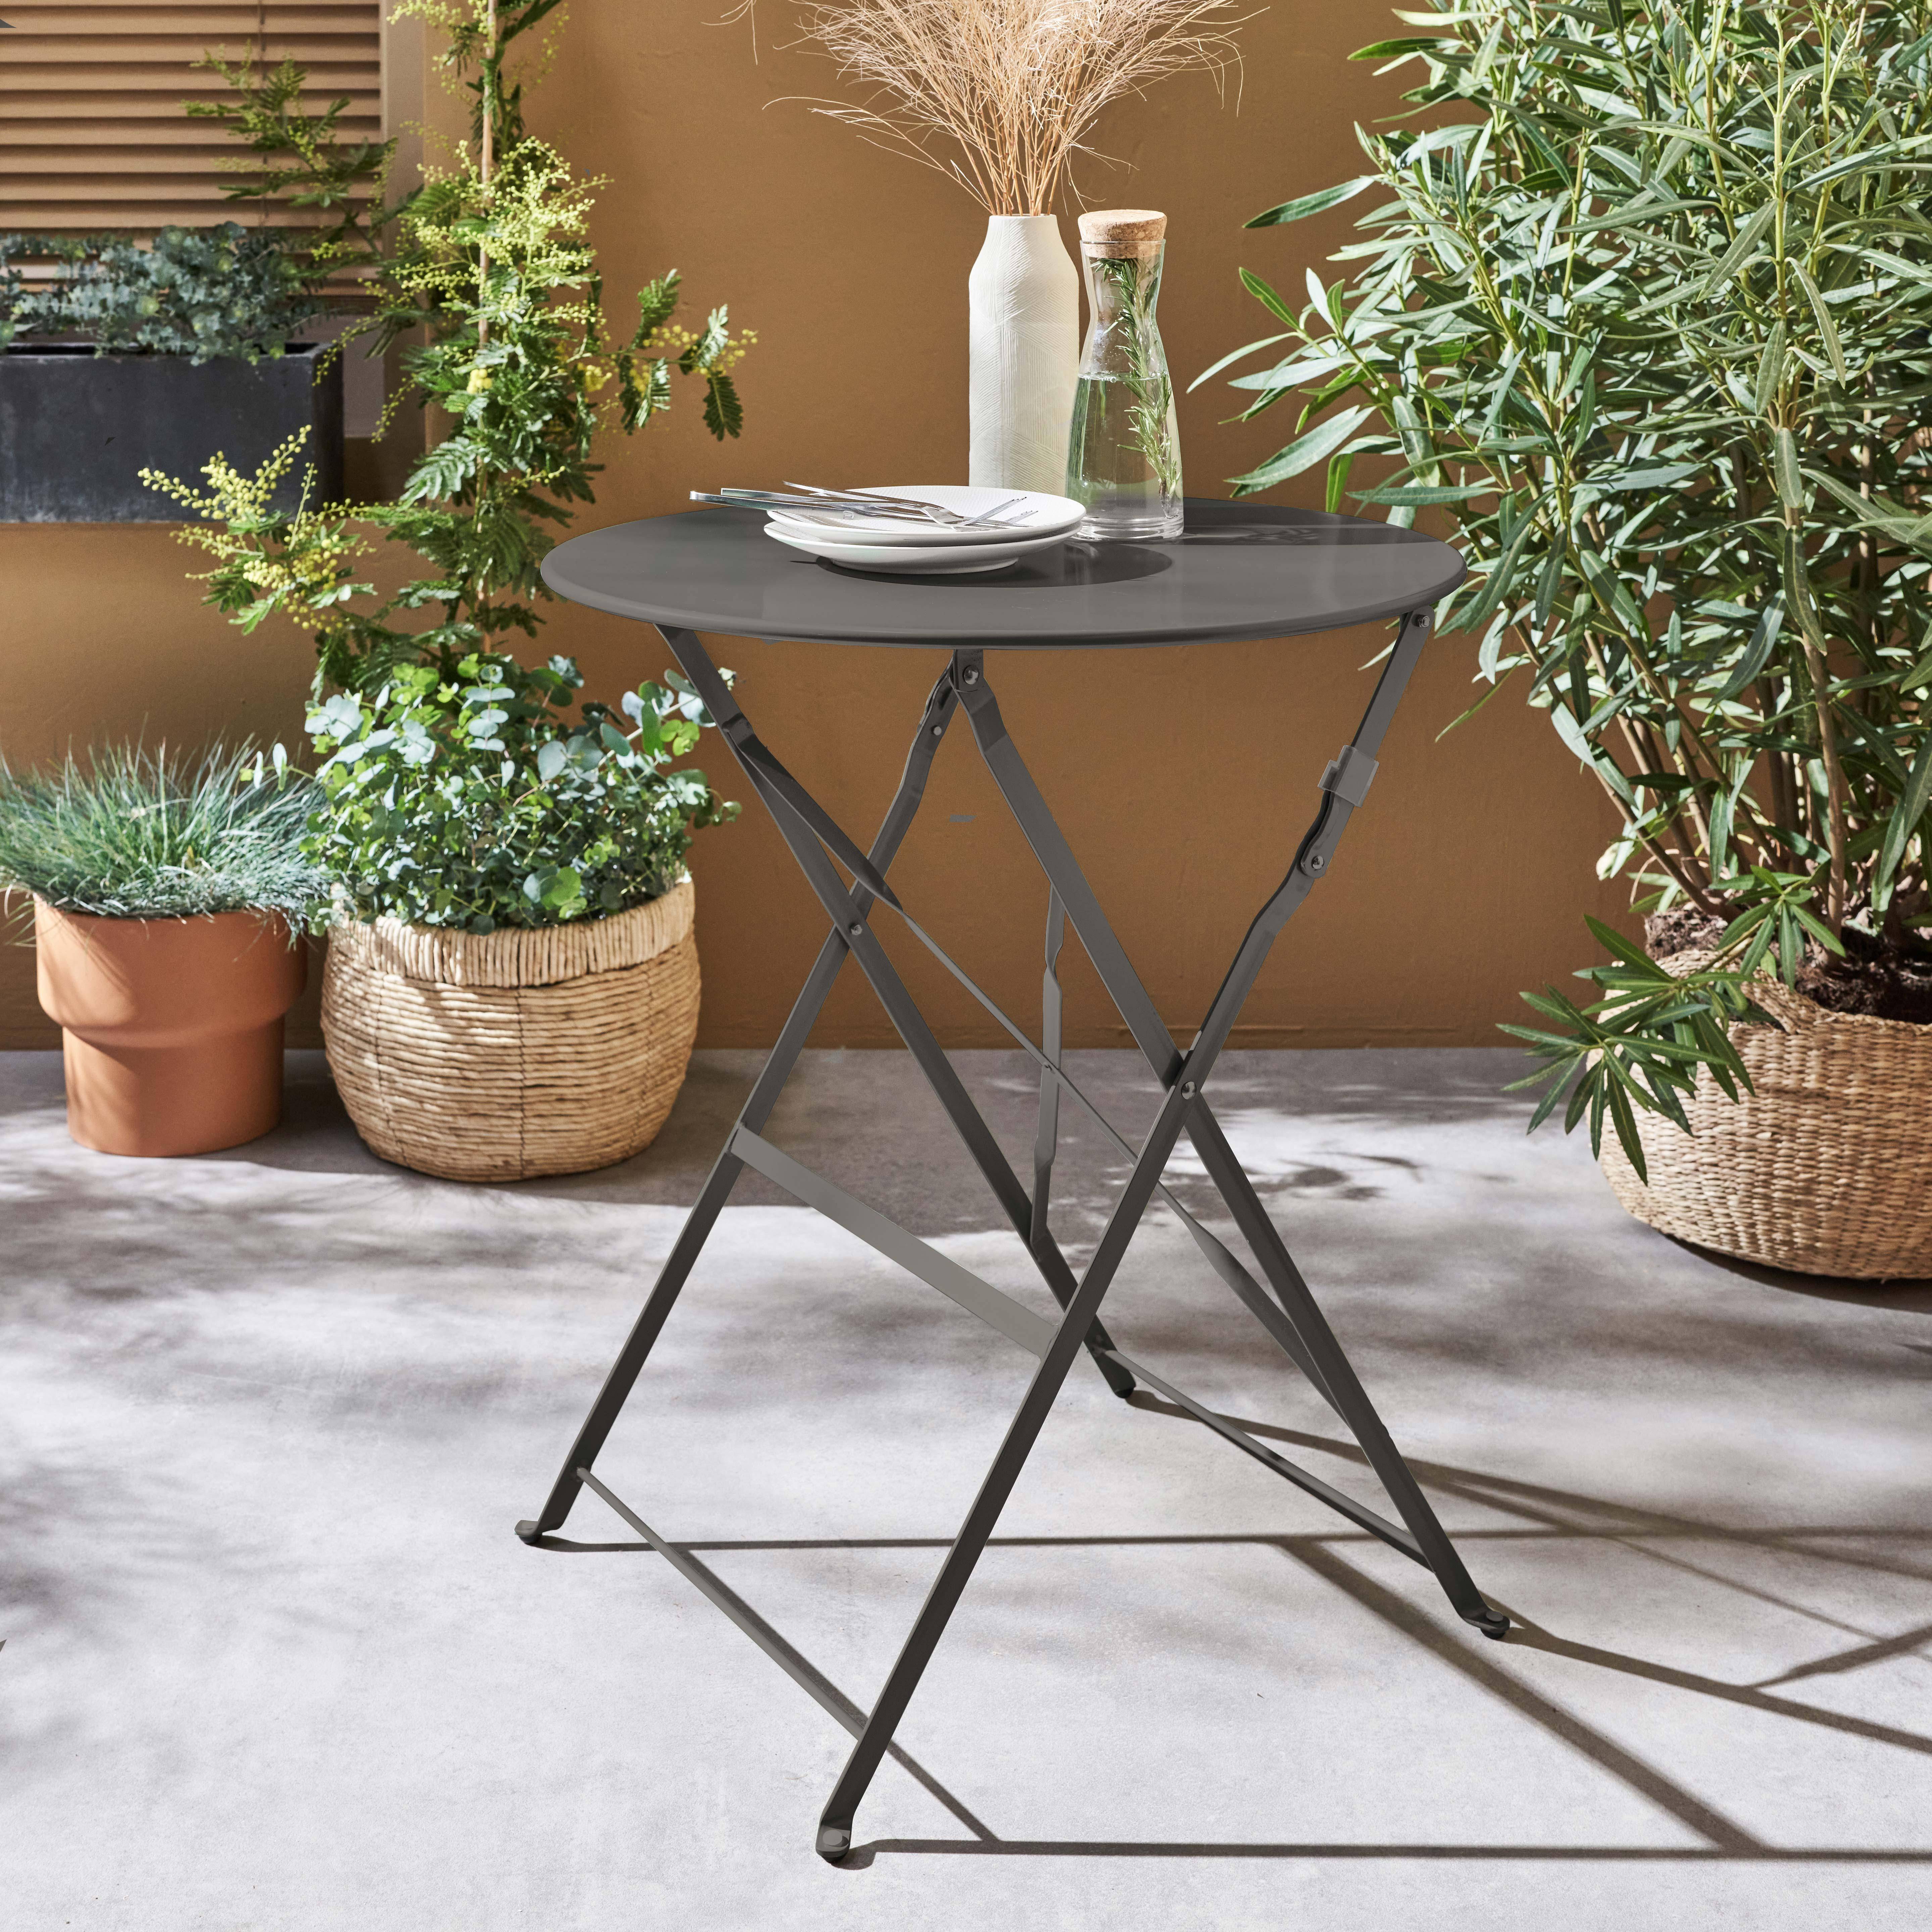 Foldable bistro garden table - Round Emilia anthracite- Round table Ø60cm, thermo-lacquered steel Photo1